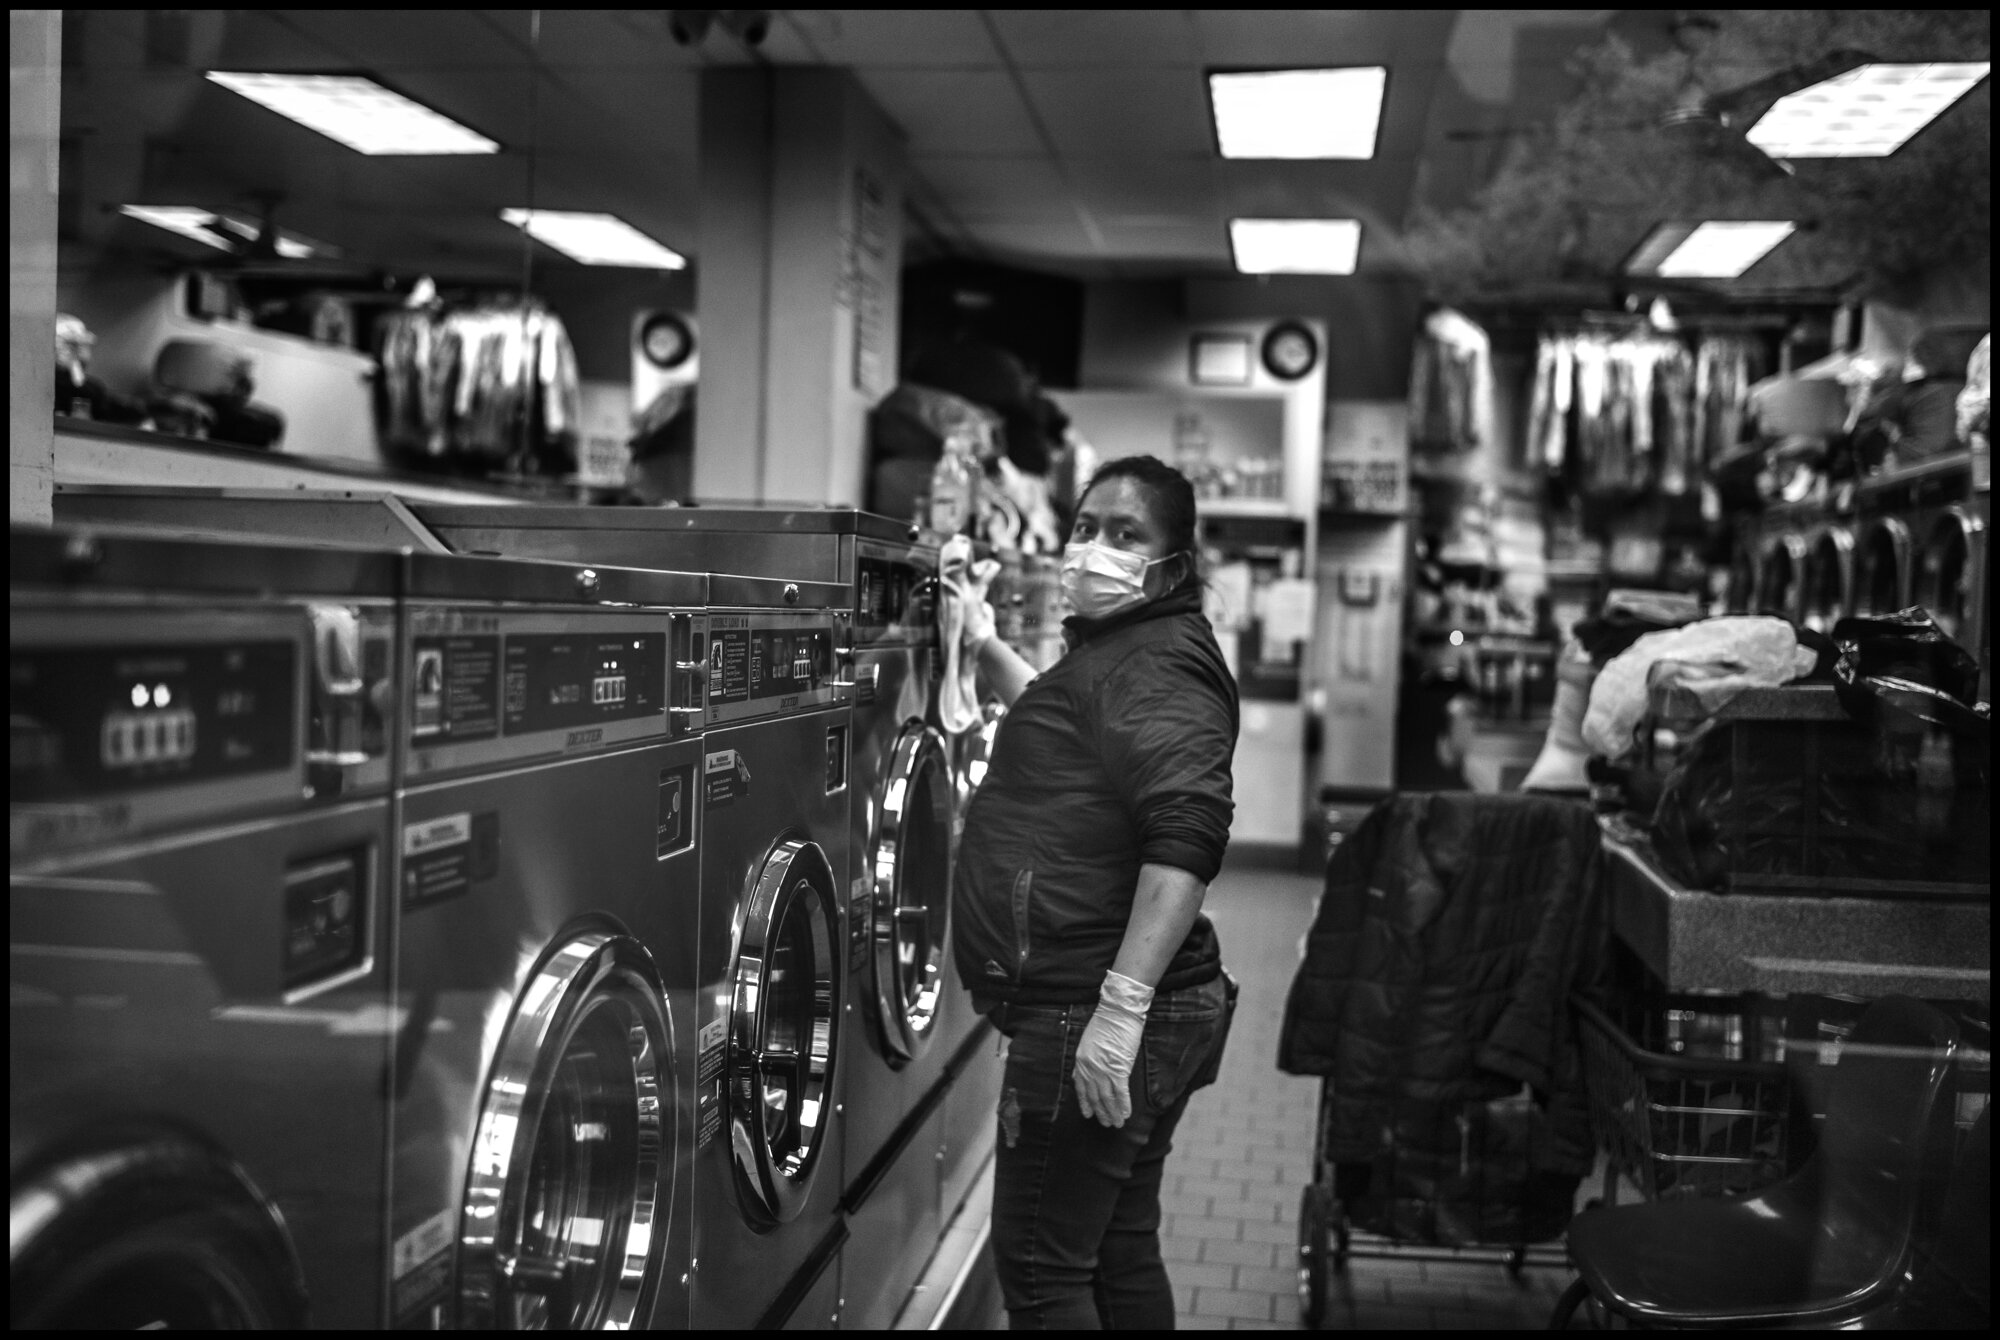  A laundry worker washes clothes at a shop on Amsterdam Avenue.  March 23, 2020. © Peter Turnley.  ID# 02-006 